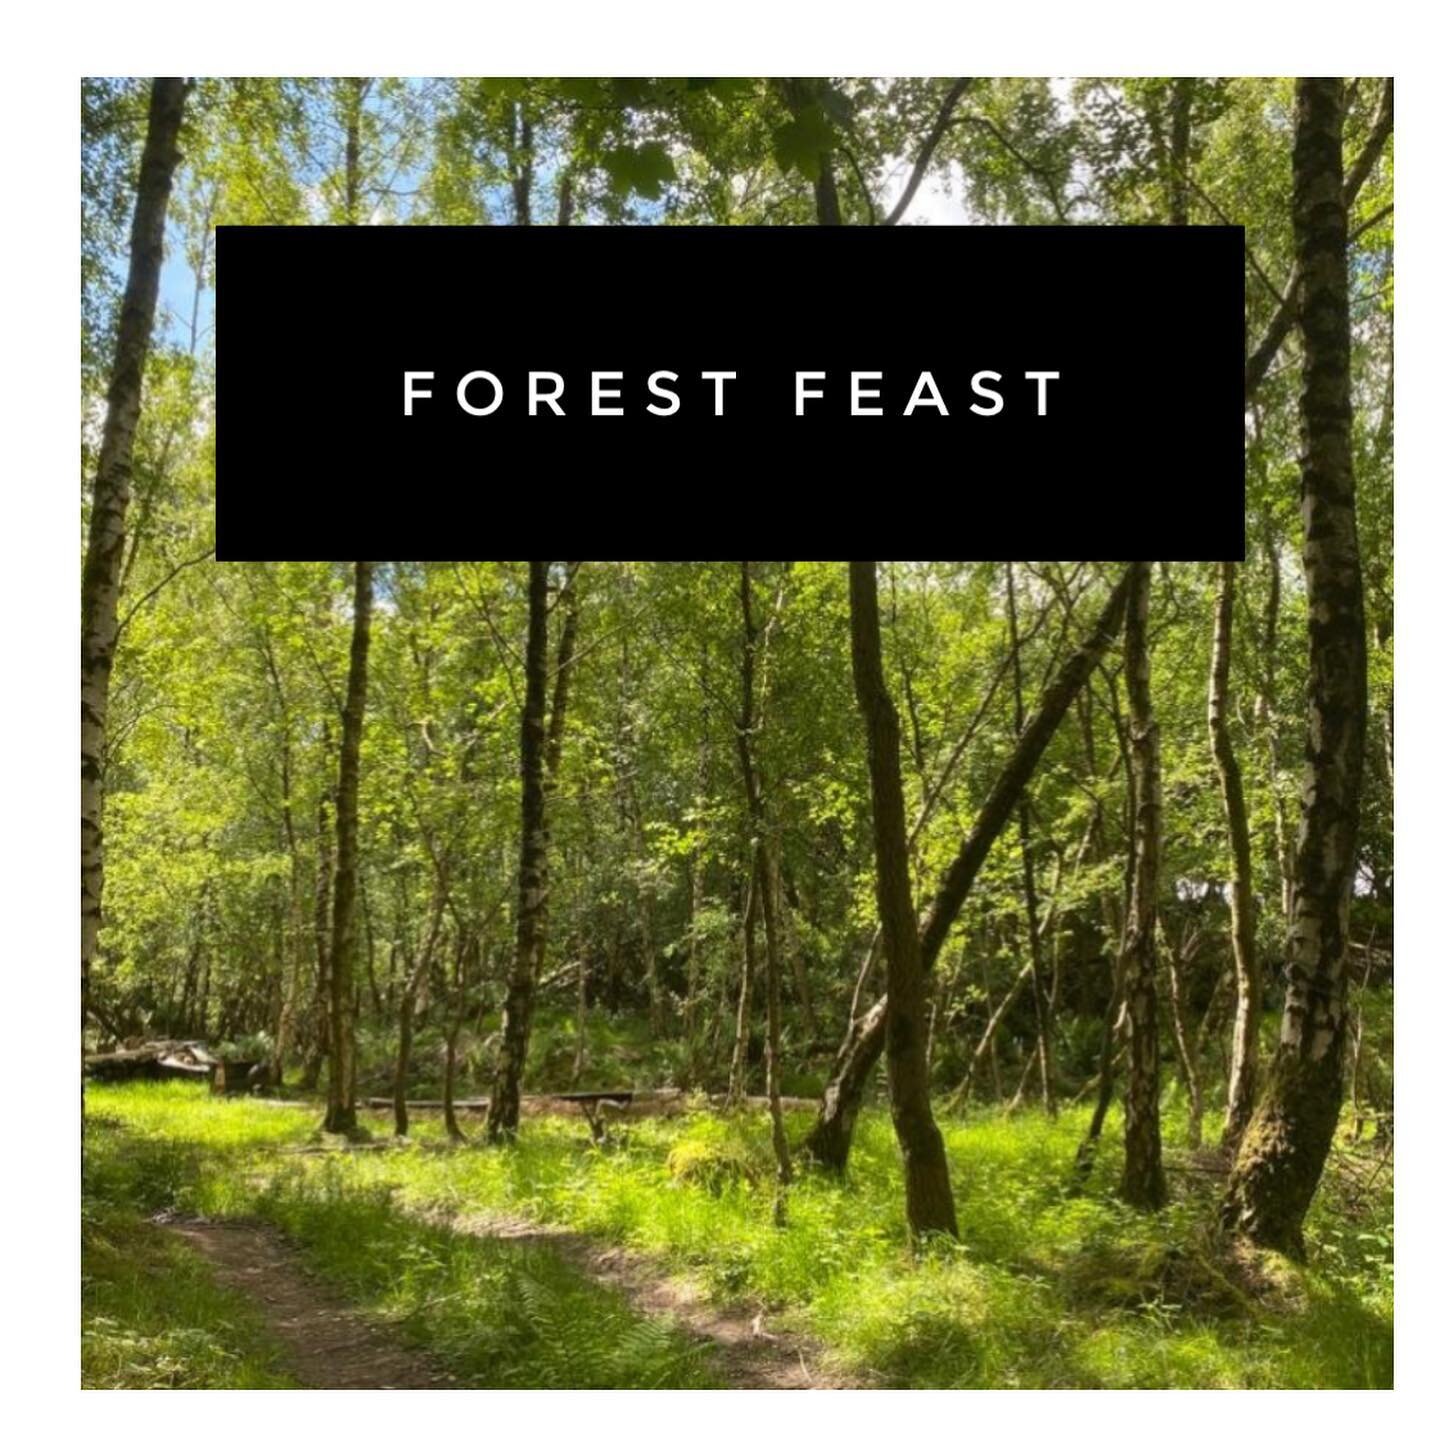 FOREST FEAST
Saturday 29th April
*ONLY 12 Tickets Remaining*
.
Wander up an enchanted pathway into a magical woods and enjoy the feast of a lifetime! 6 beautifully crafted courses from local, seasonal produce, will be shared amongst a table of happy 